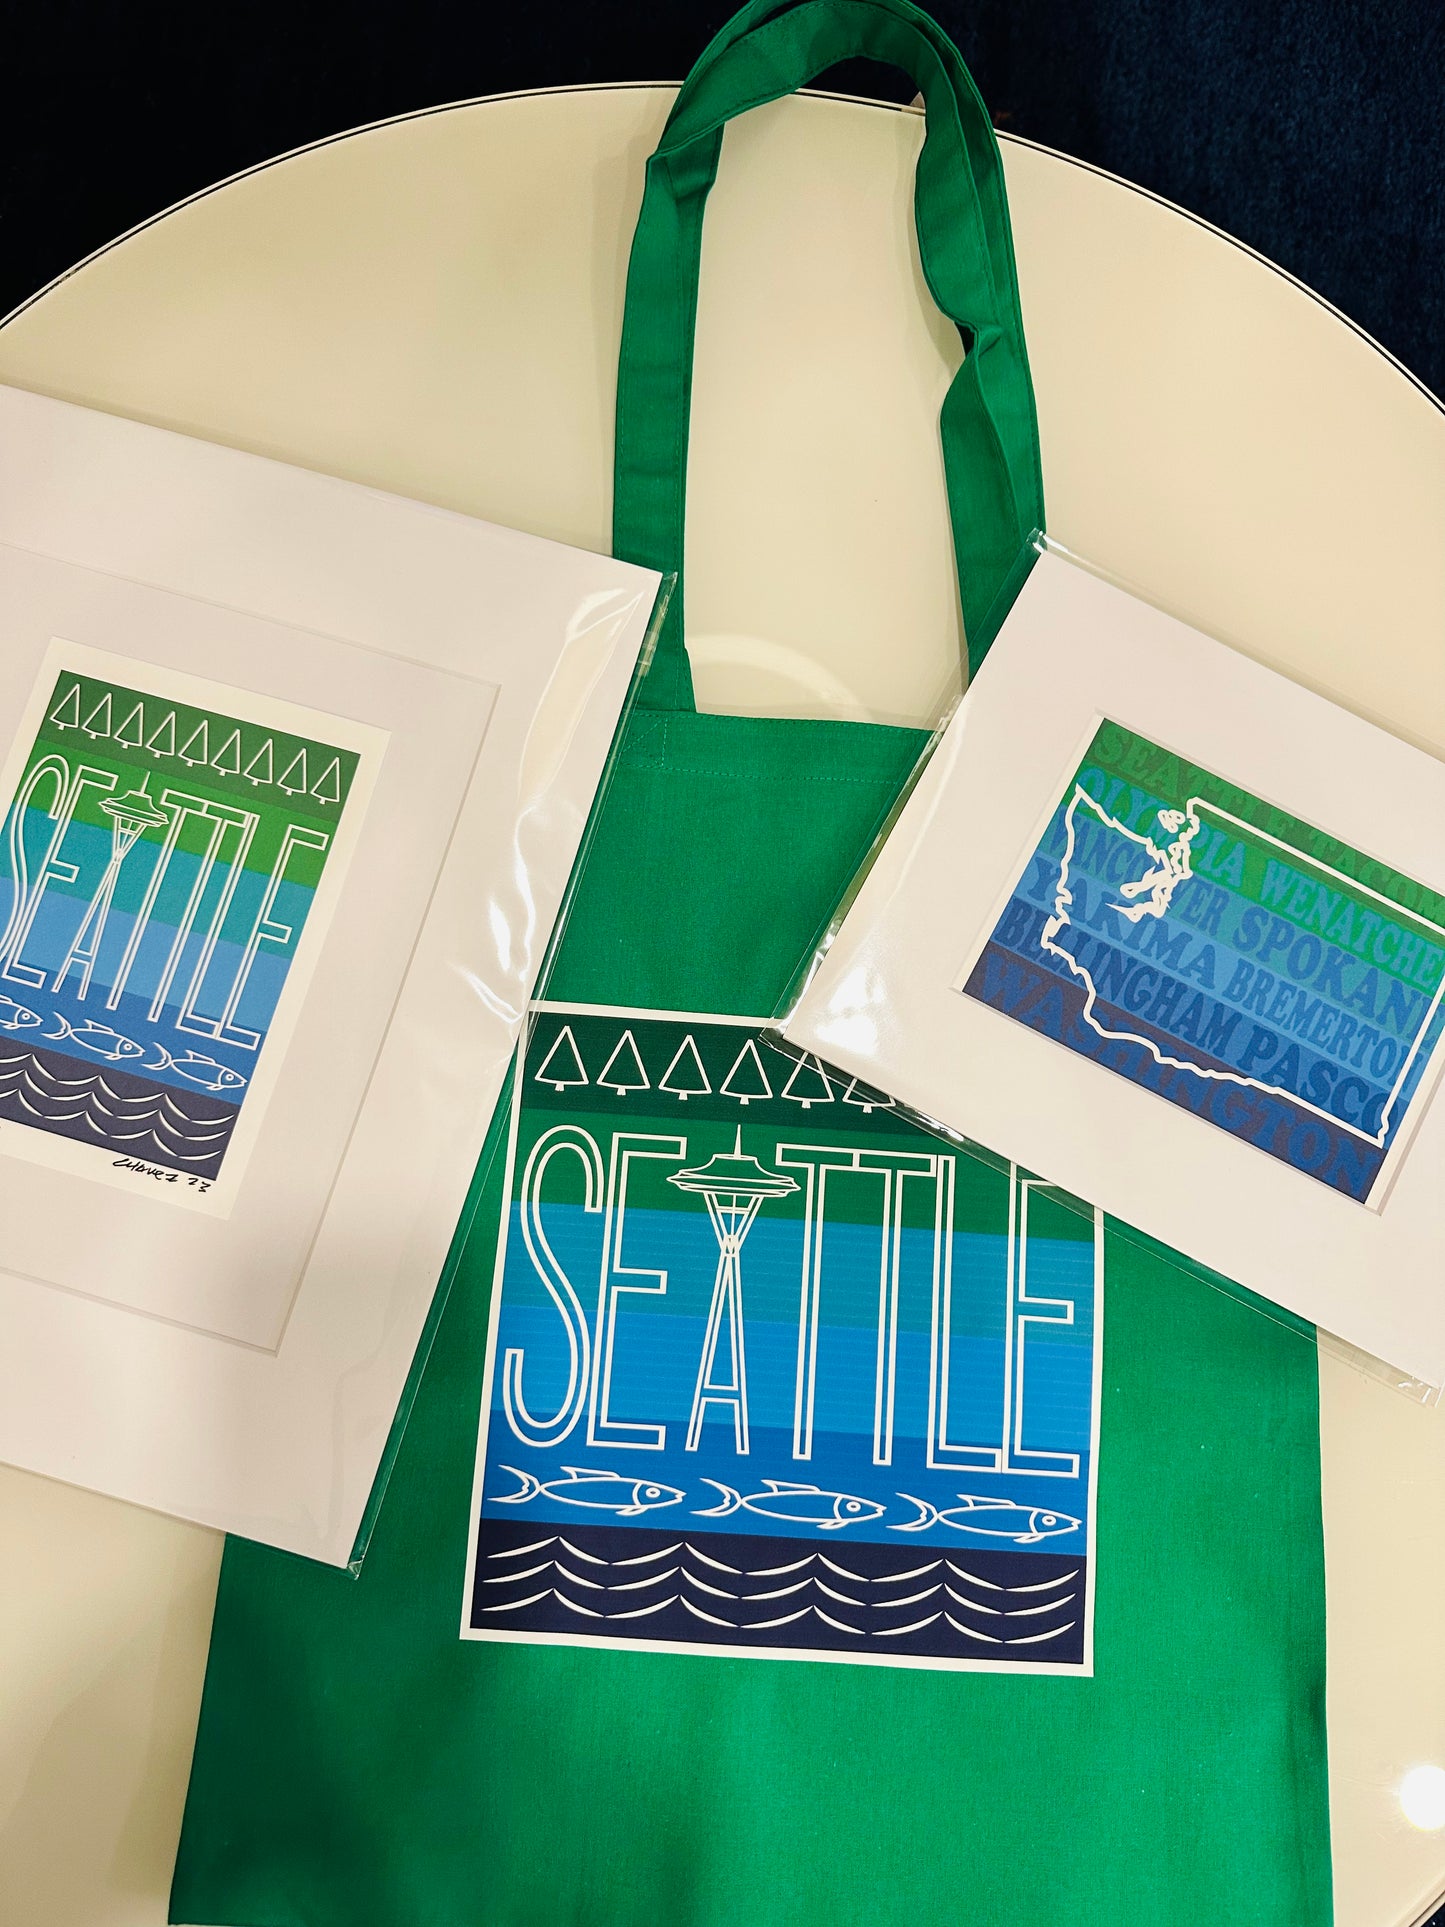 SEATTLE Space needle  trees, salmon Icons 5x7 Greeting Card